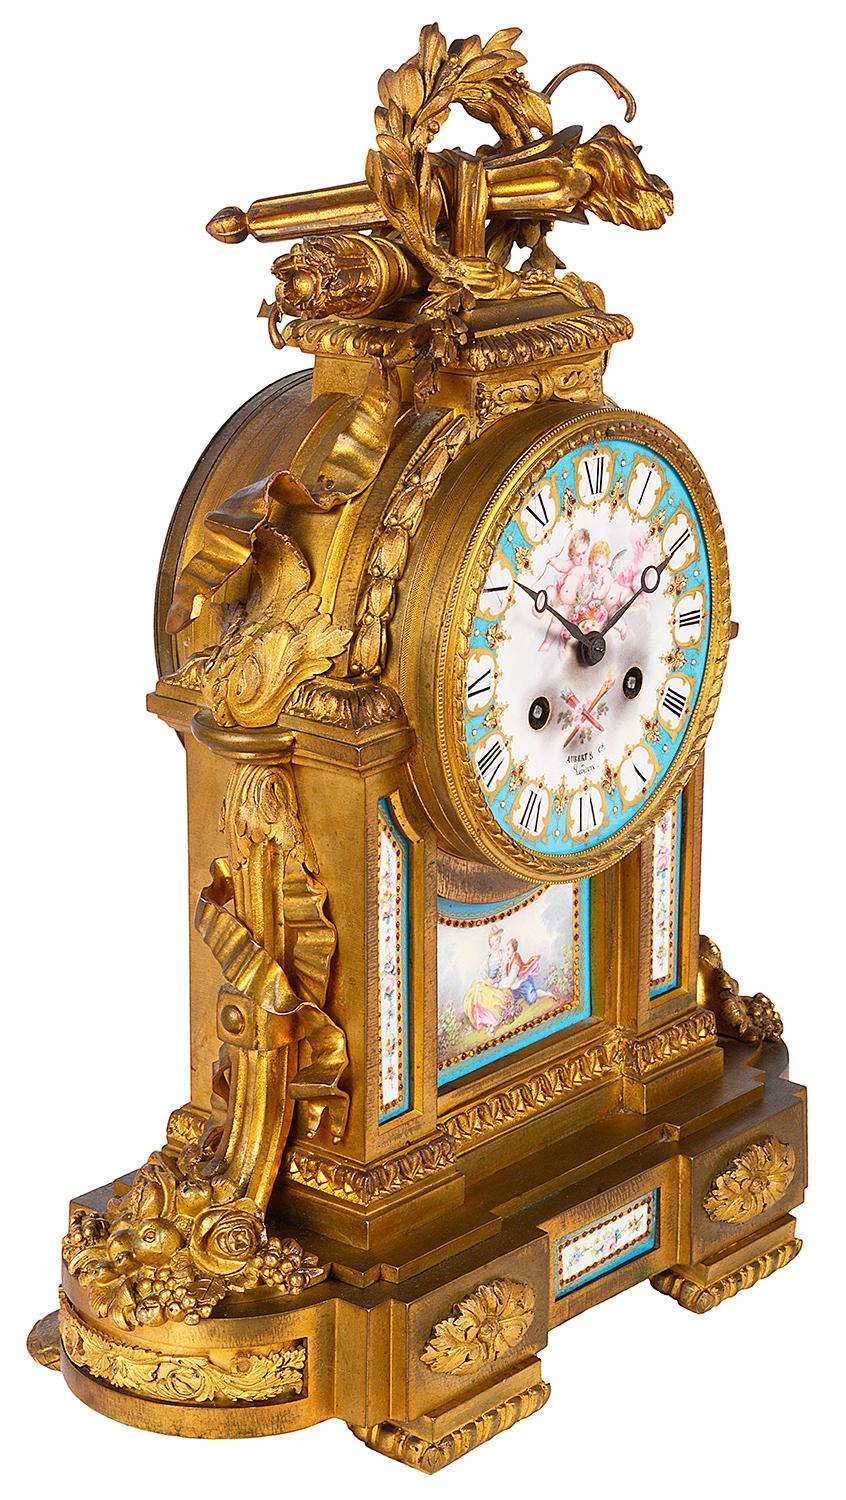 A good quality 19th century French gilded ormolu and Sevres style porcelain mantel clock. Having wreaths of foliage, arrows, sheaths, ribbons, and a pair of cornucopia on either side. The porcelain clock face with Roman numerals, an eight day